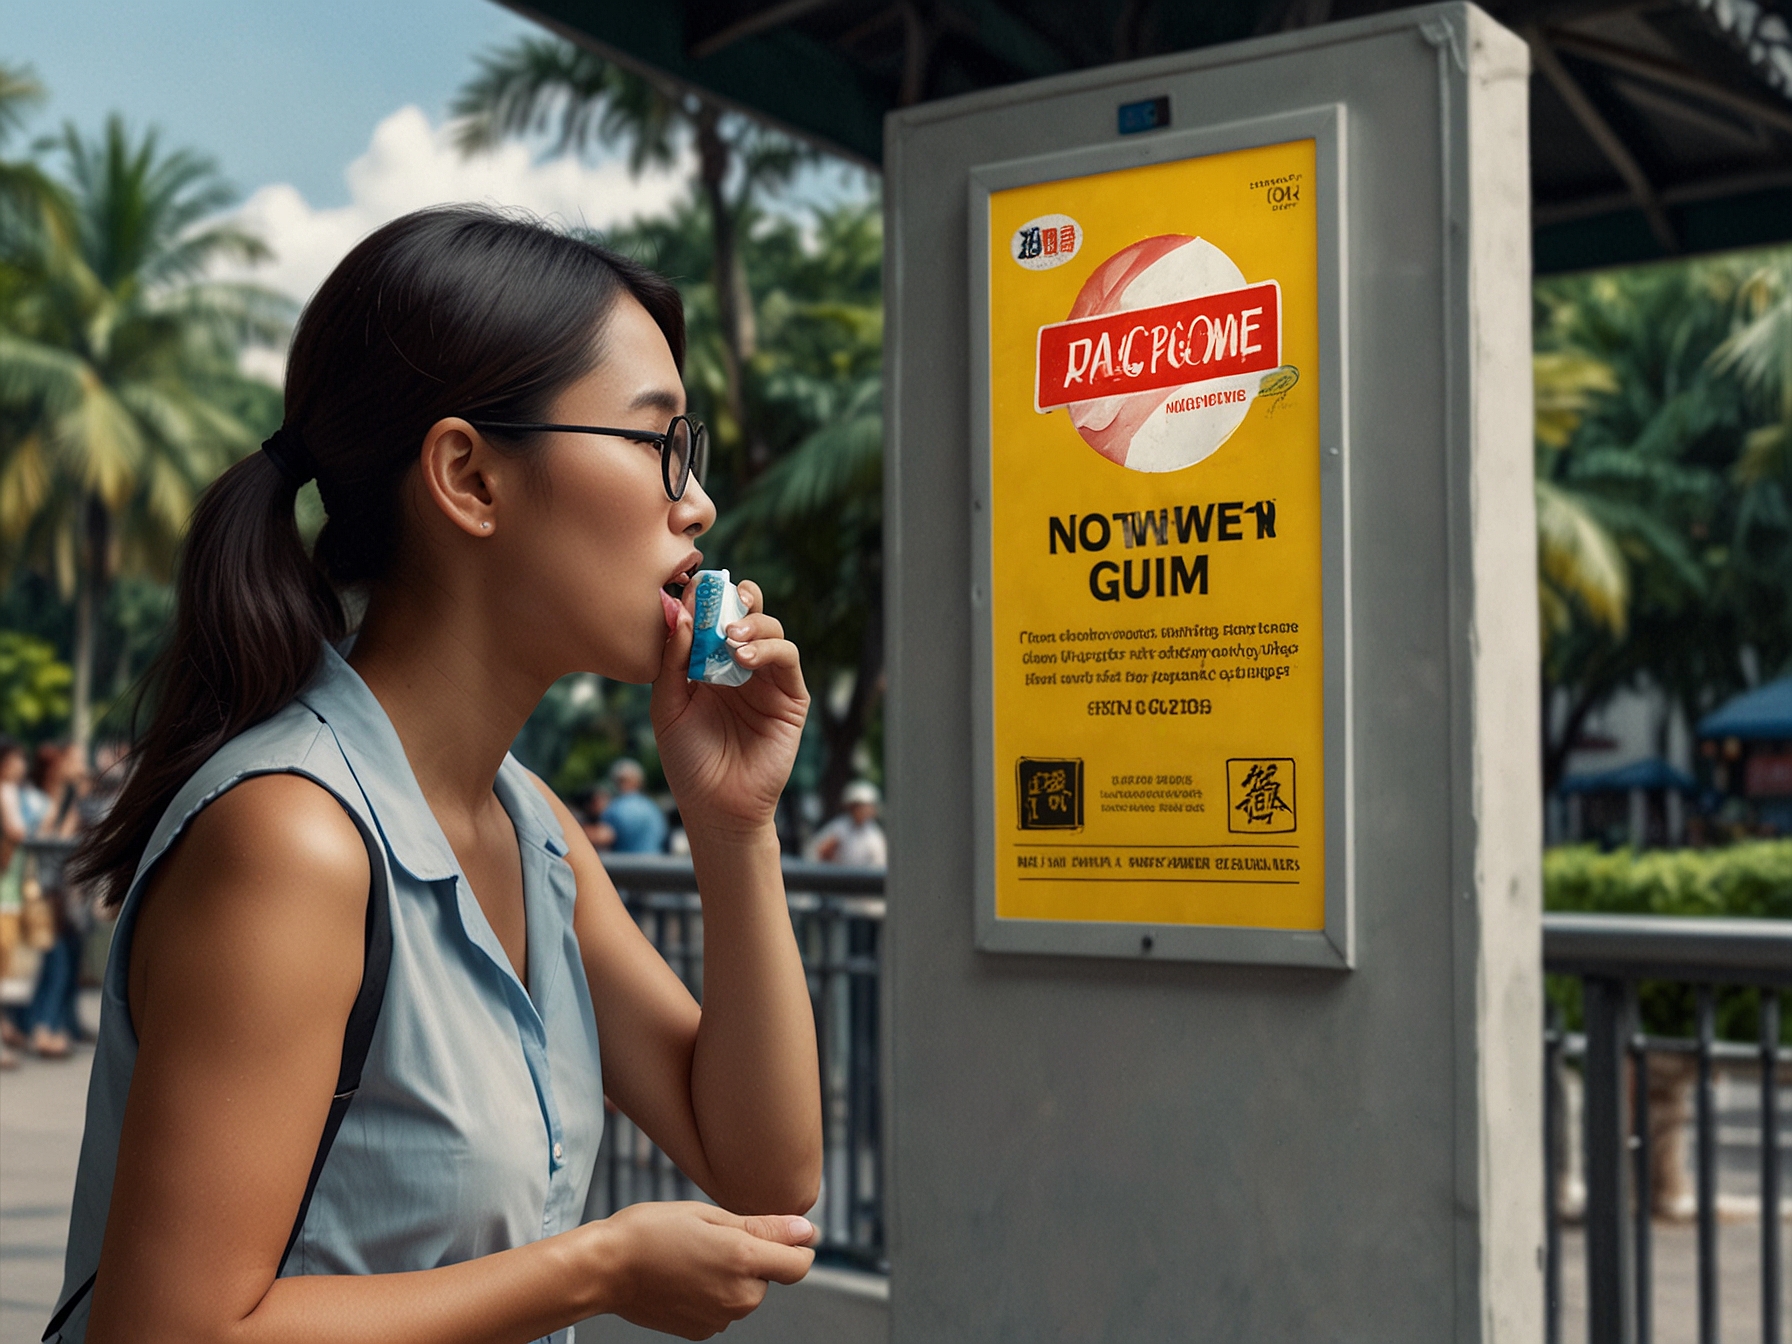 A tourist in Singapore surprised by a 'No Chewing Gum' sign, emphasizing the strict regulation against chewing gum to keep public spaces clean.